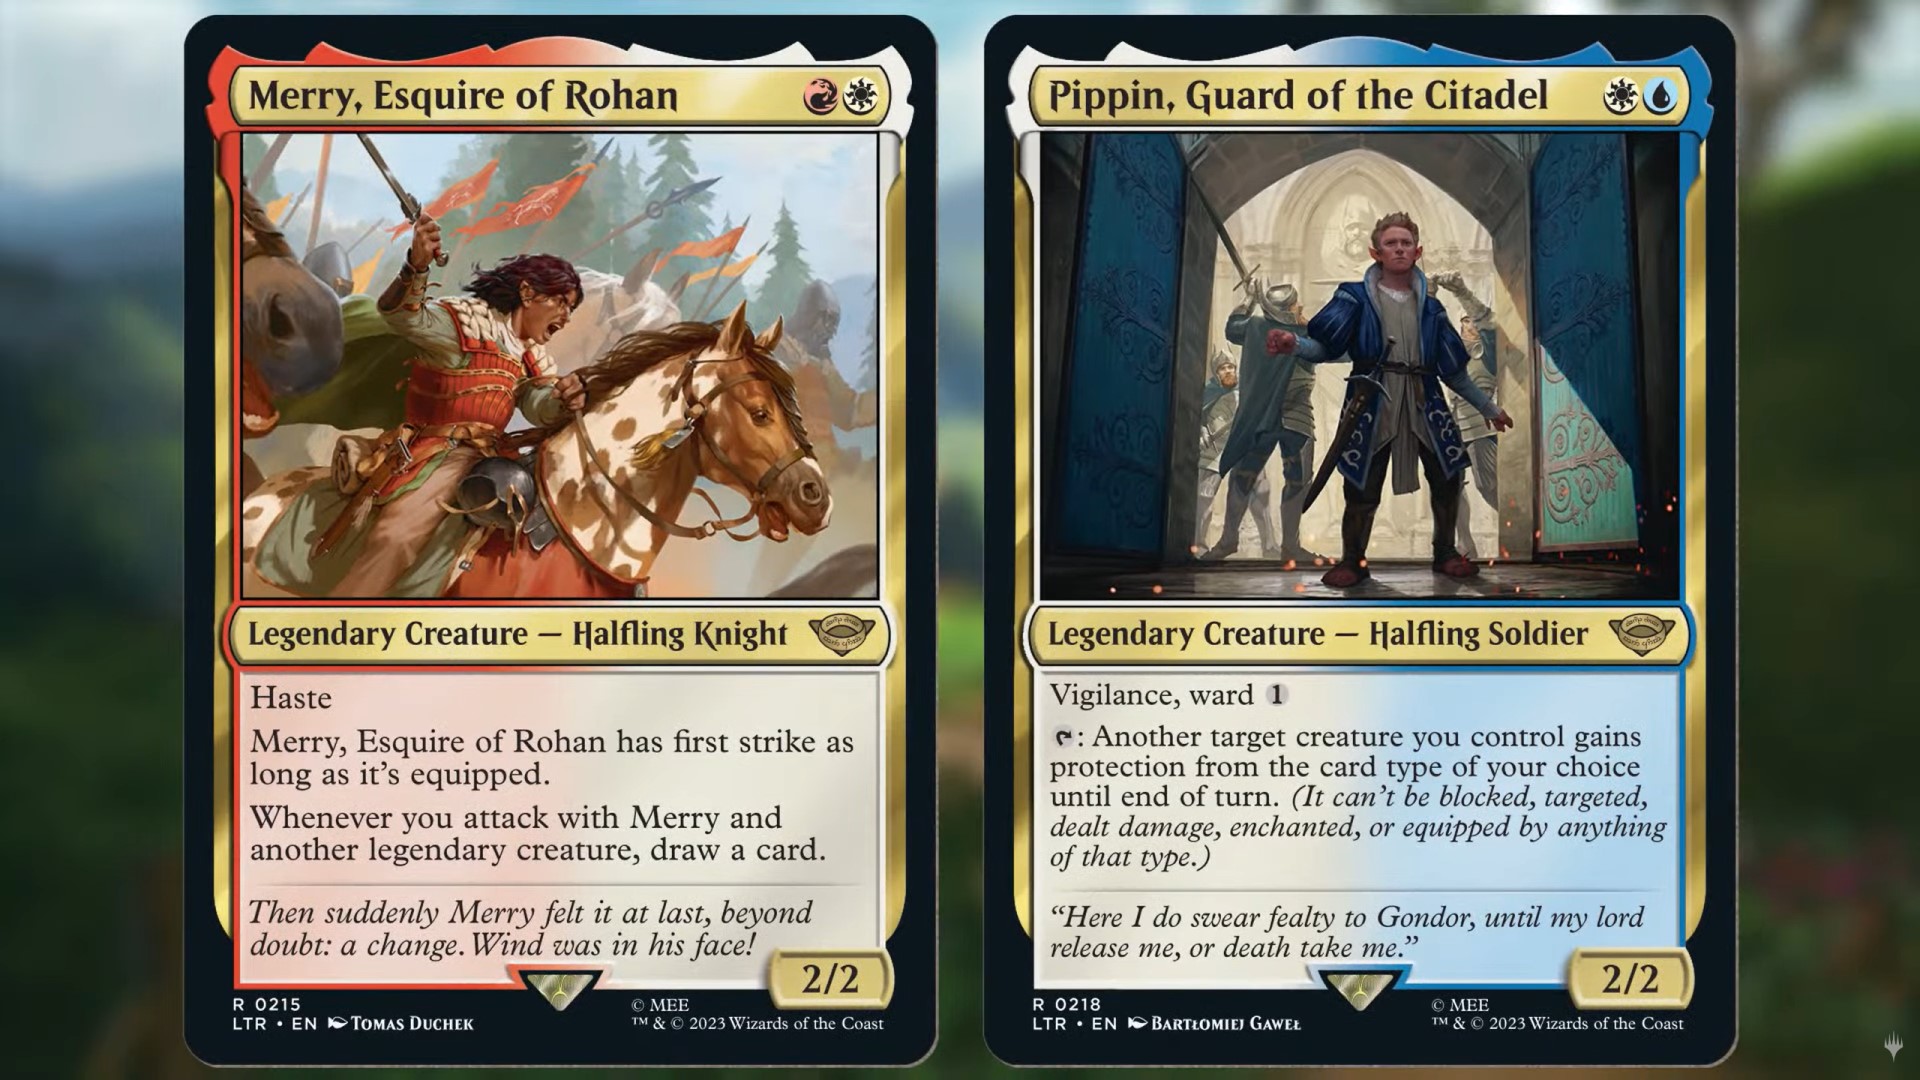 Lord of the Rings is coming to Magic the Gathering! 